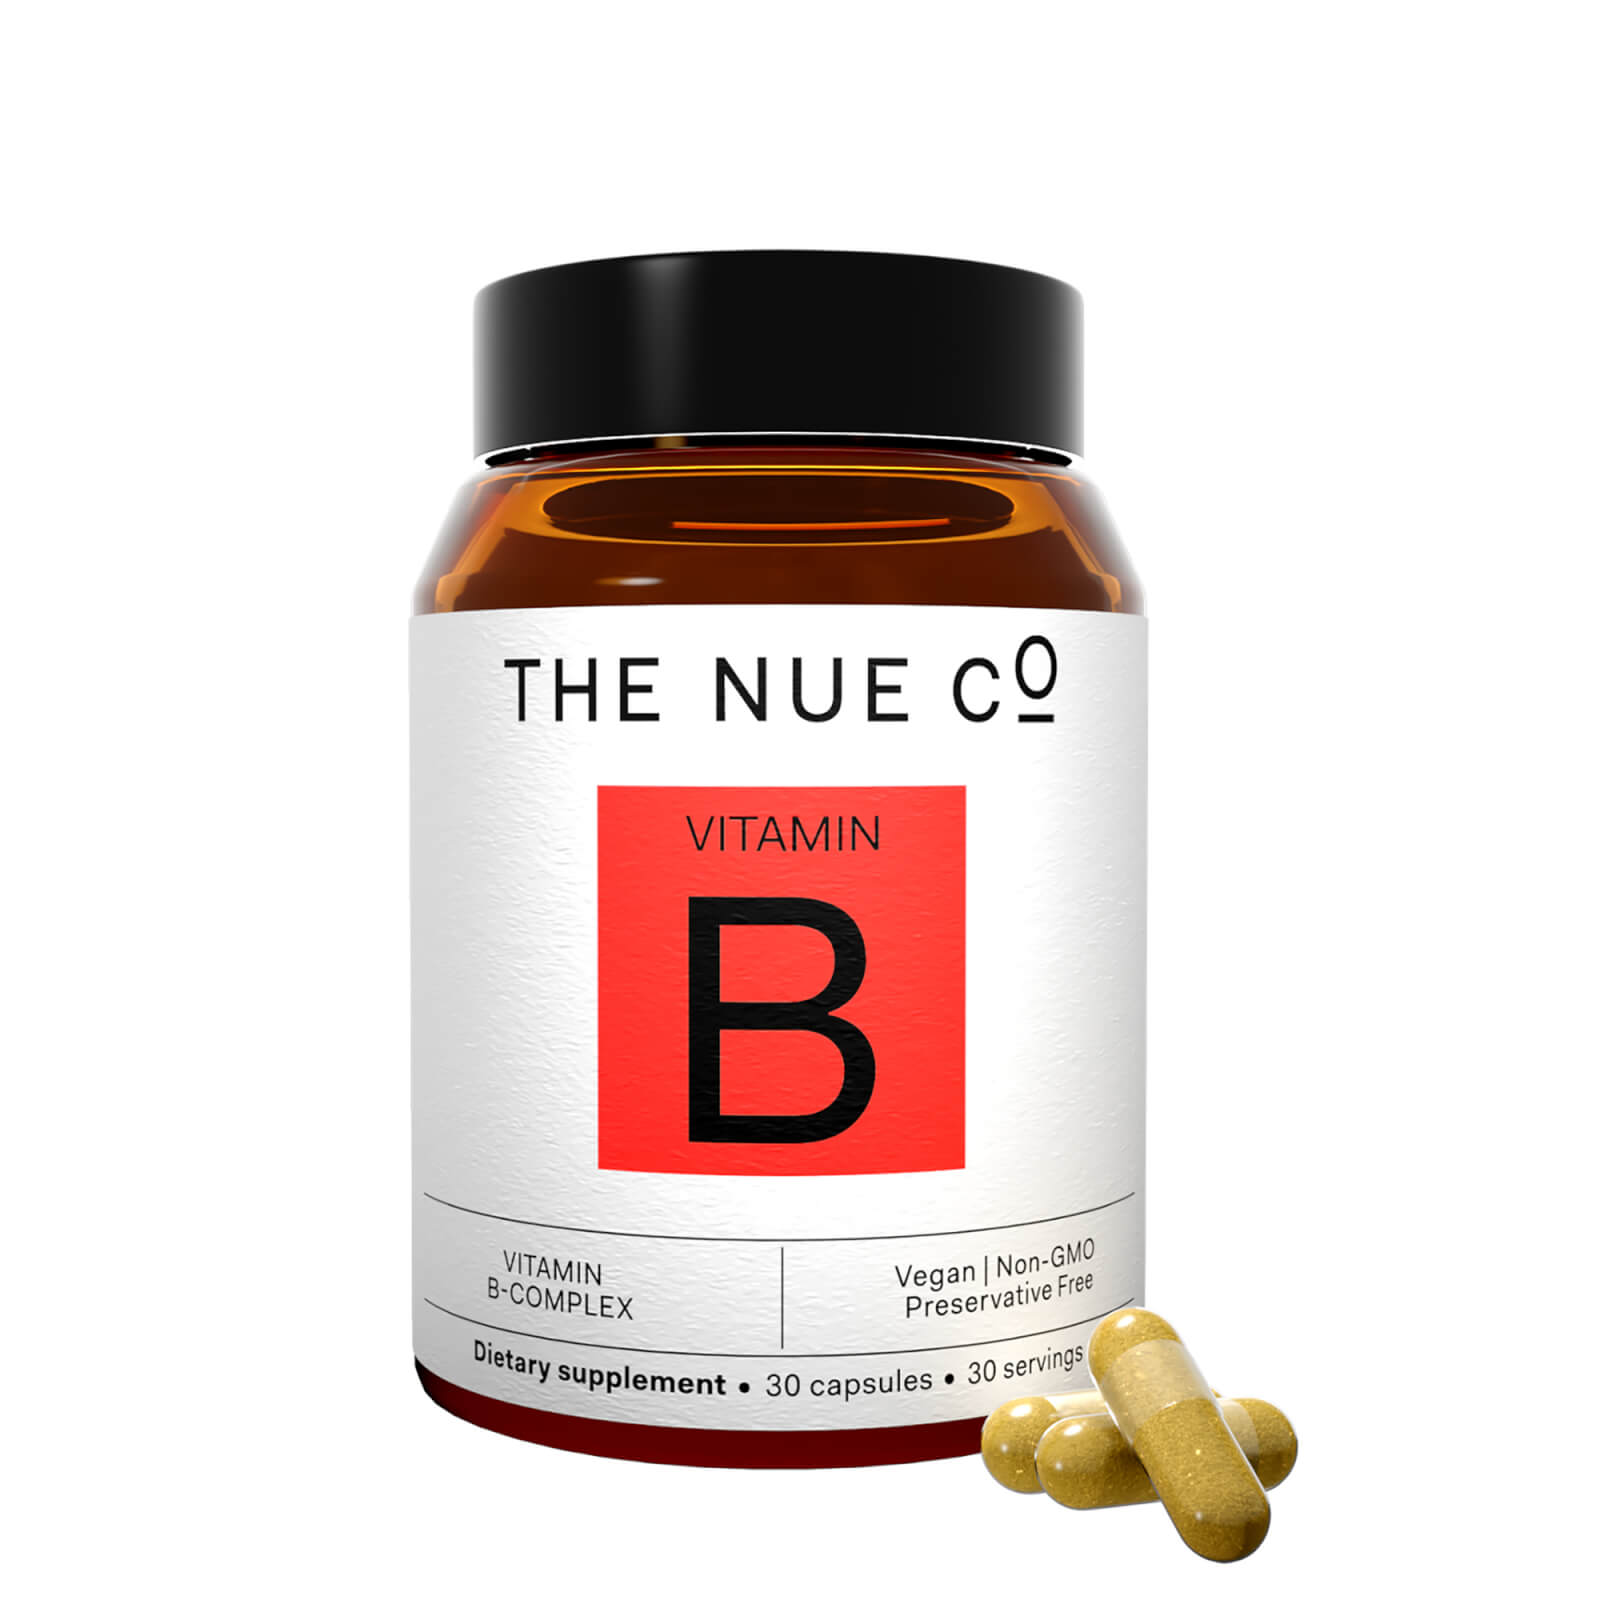 The Nue Co Vitamin B Supplement To Improve Energy (30 Capsules) In White